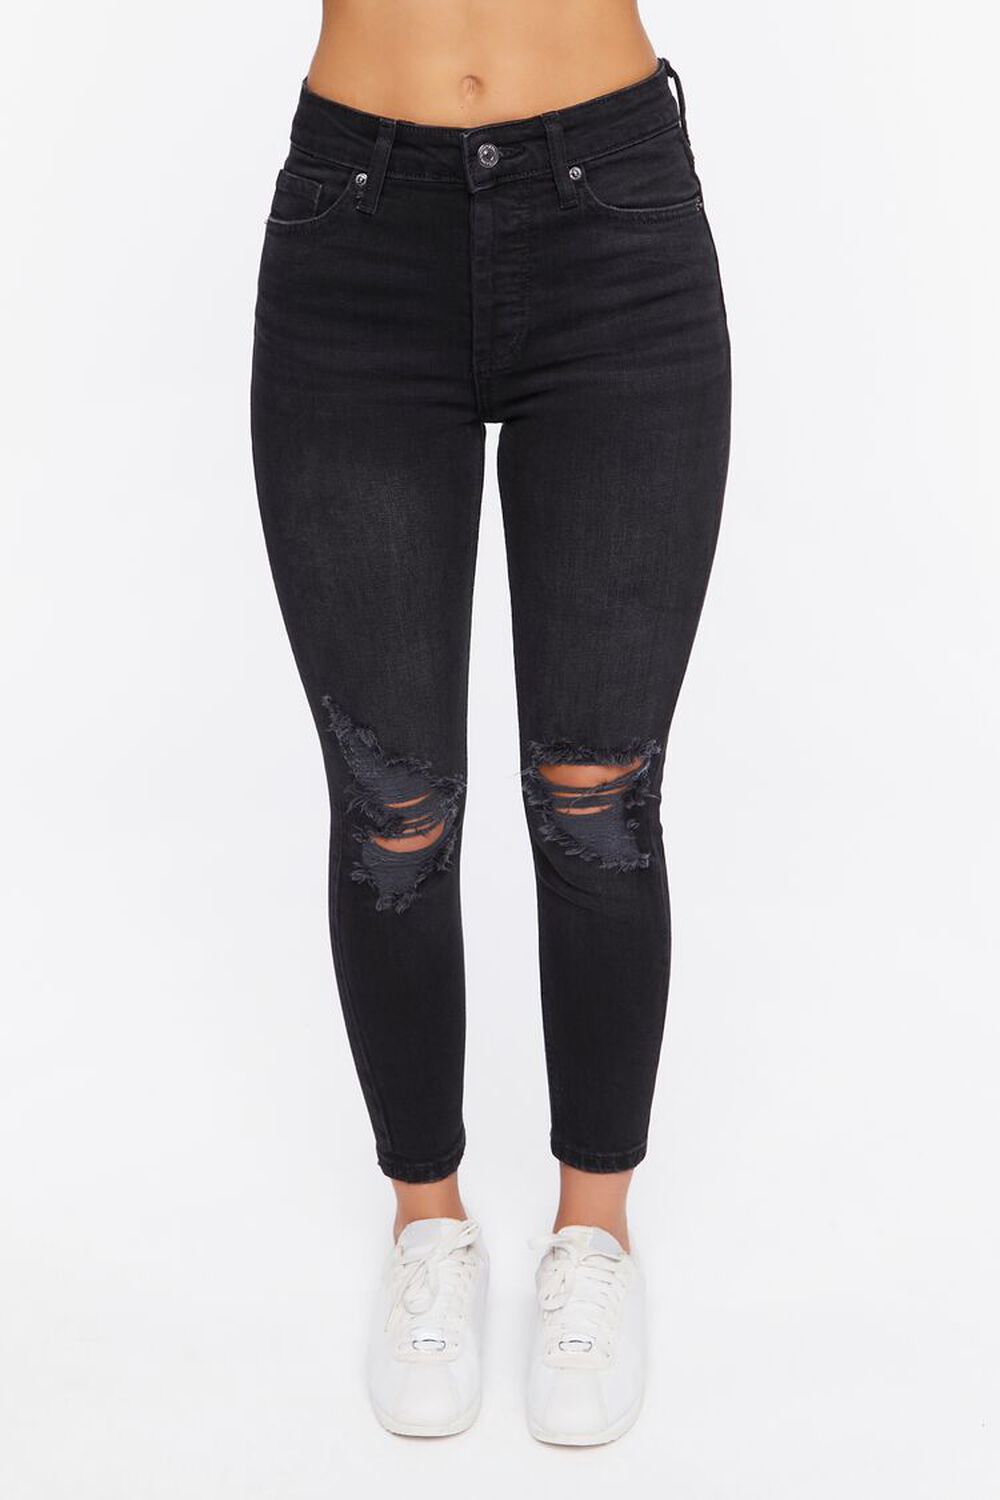 WASHED BLACK Petite High-Rise Skinny Jeans, image 2